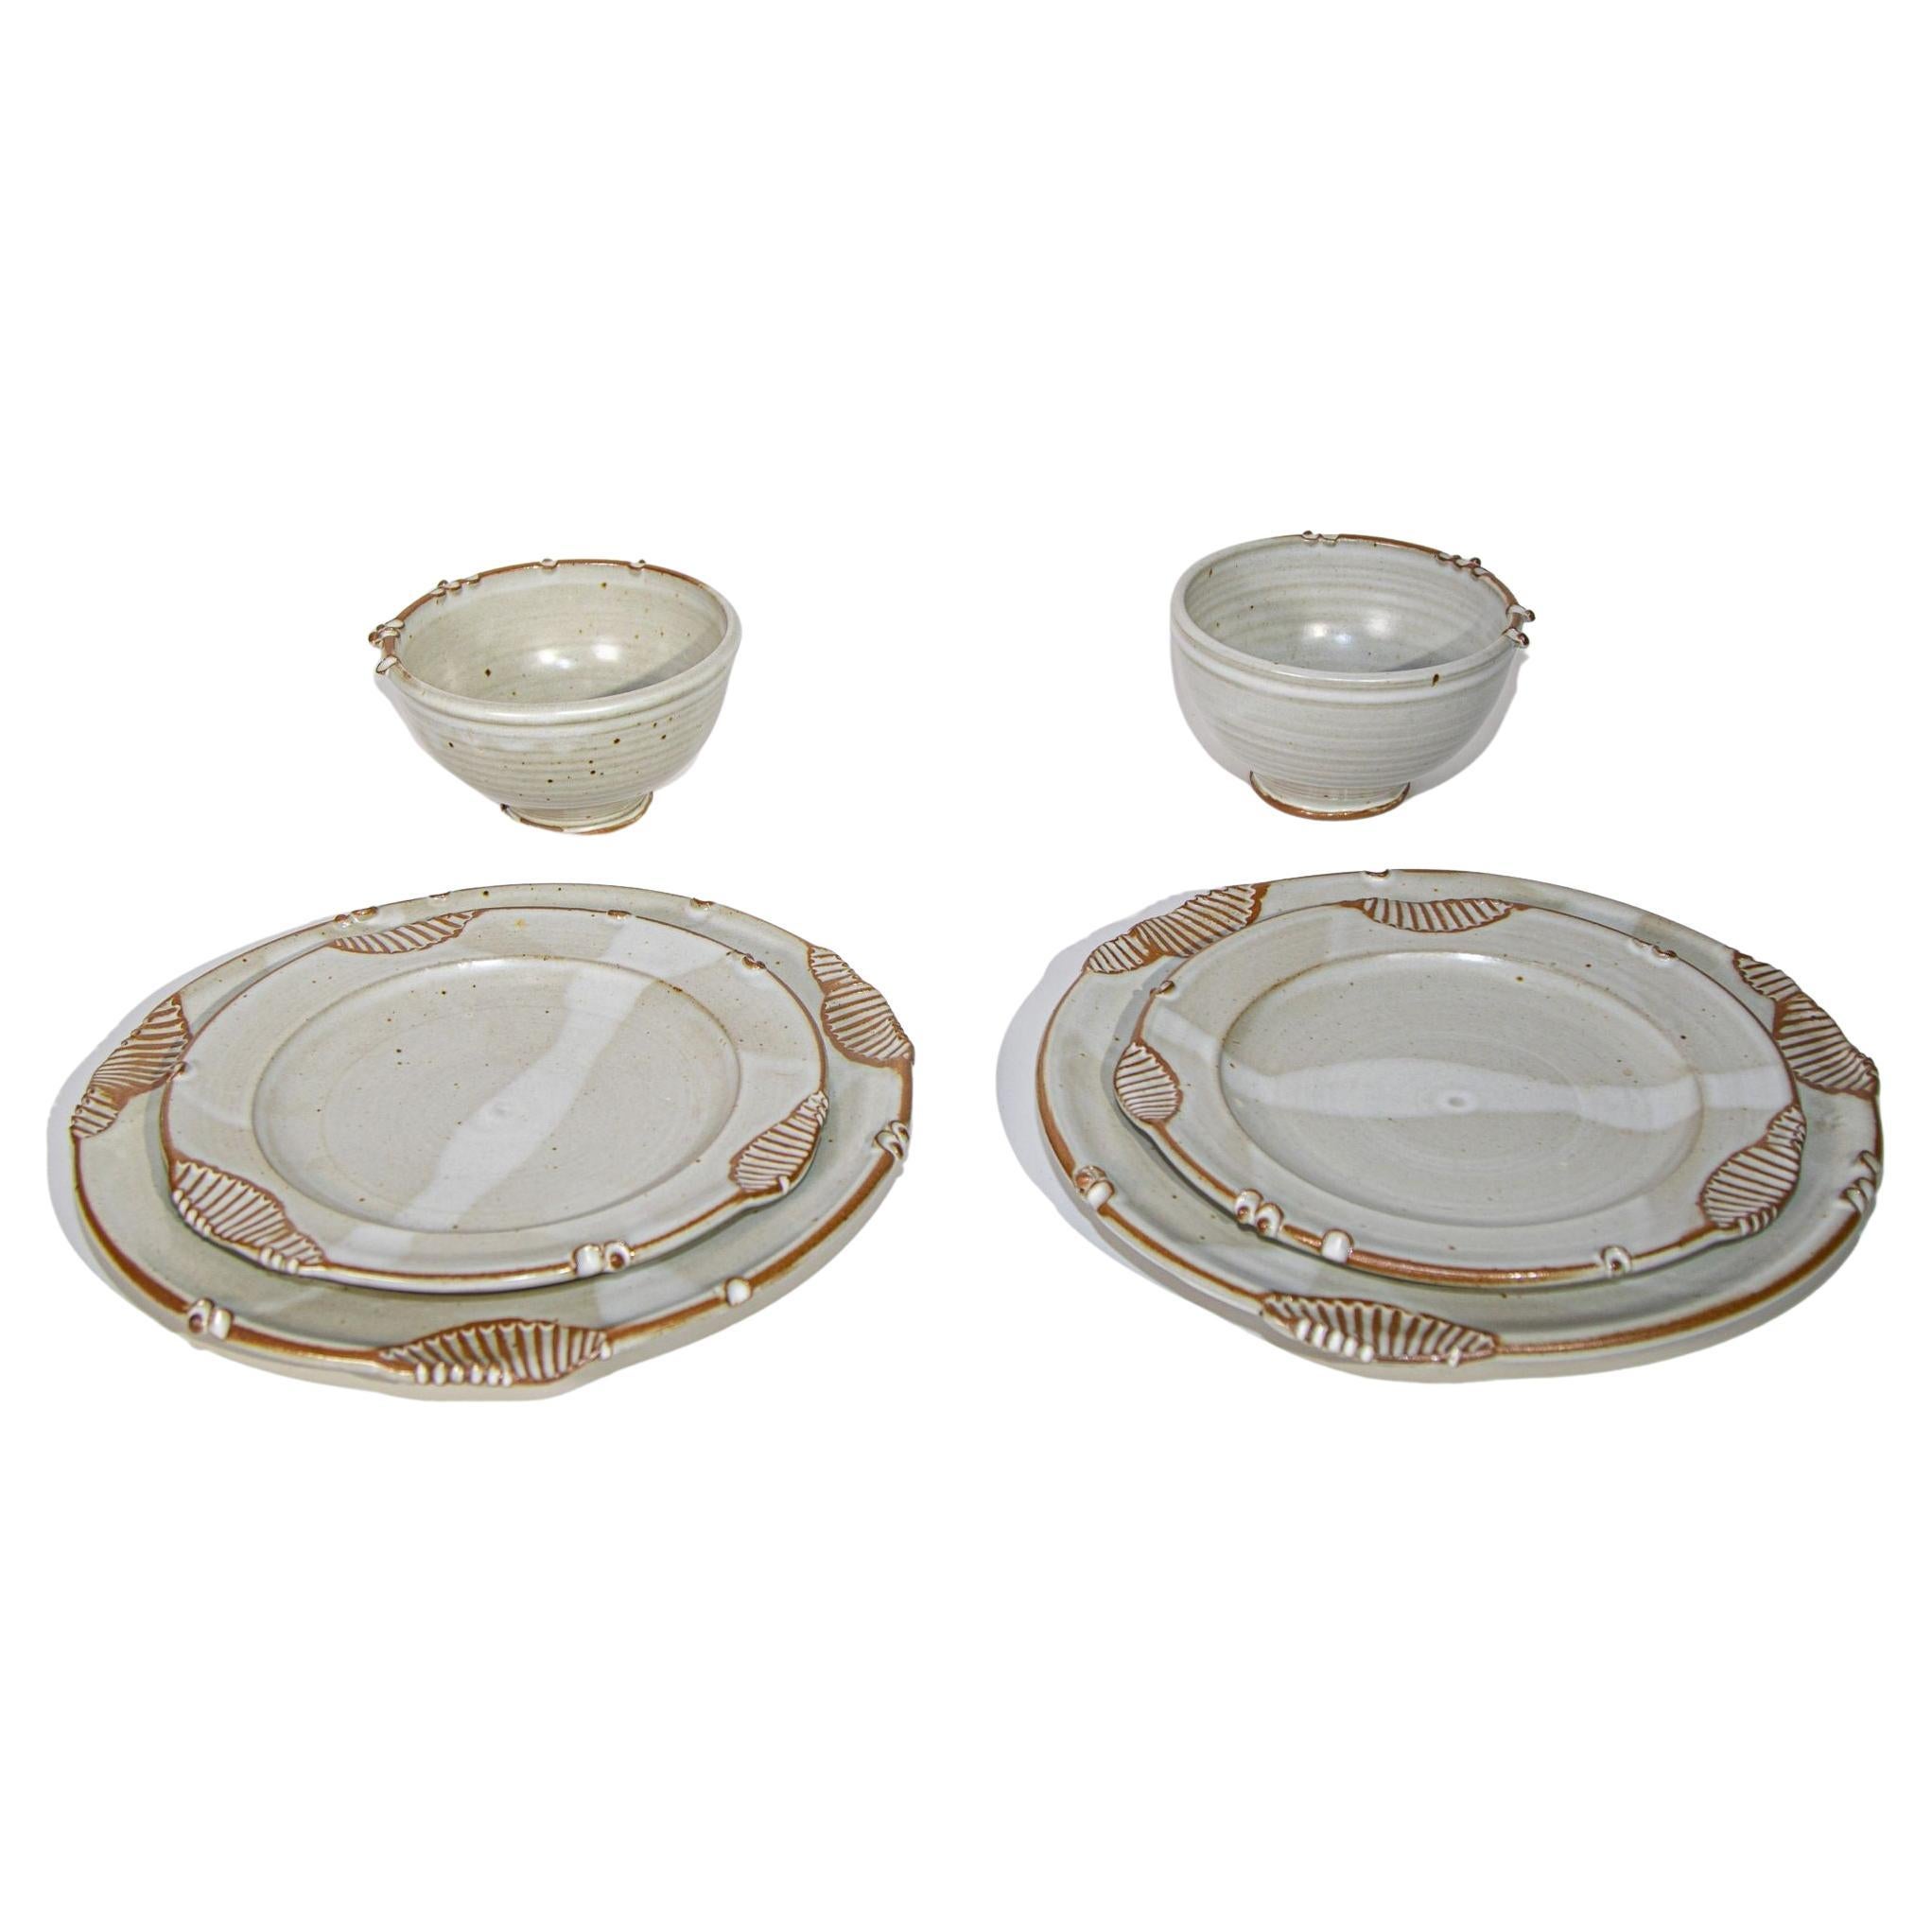 Paul Anthony Vintage Cream and Brown Stoneware Service Set of 6 For Sale